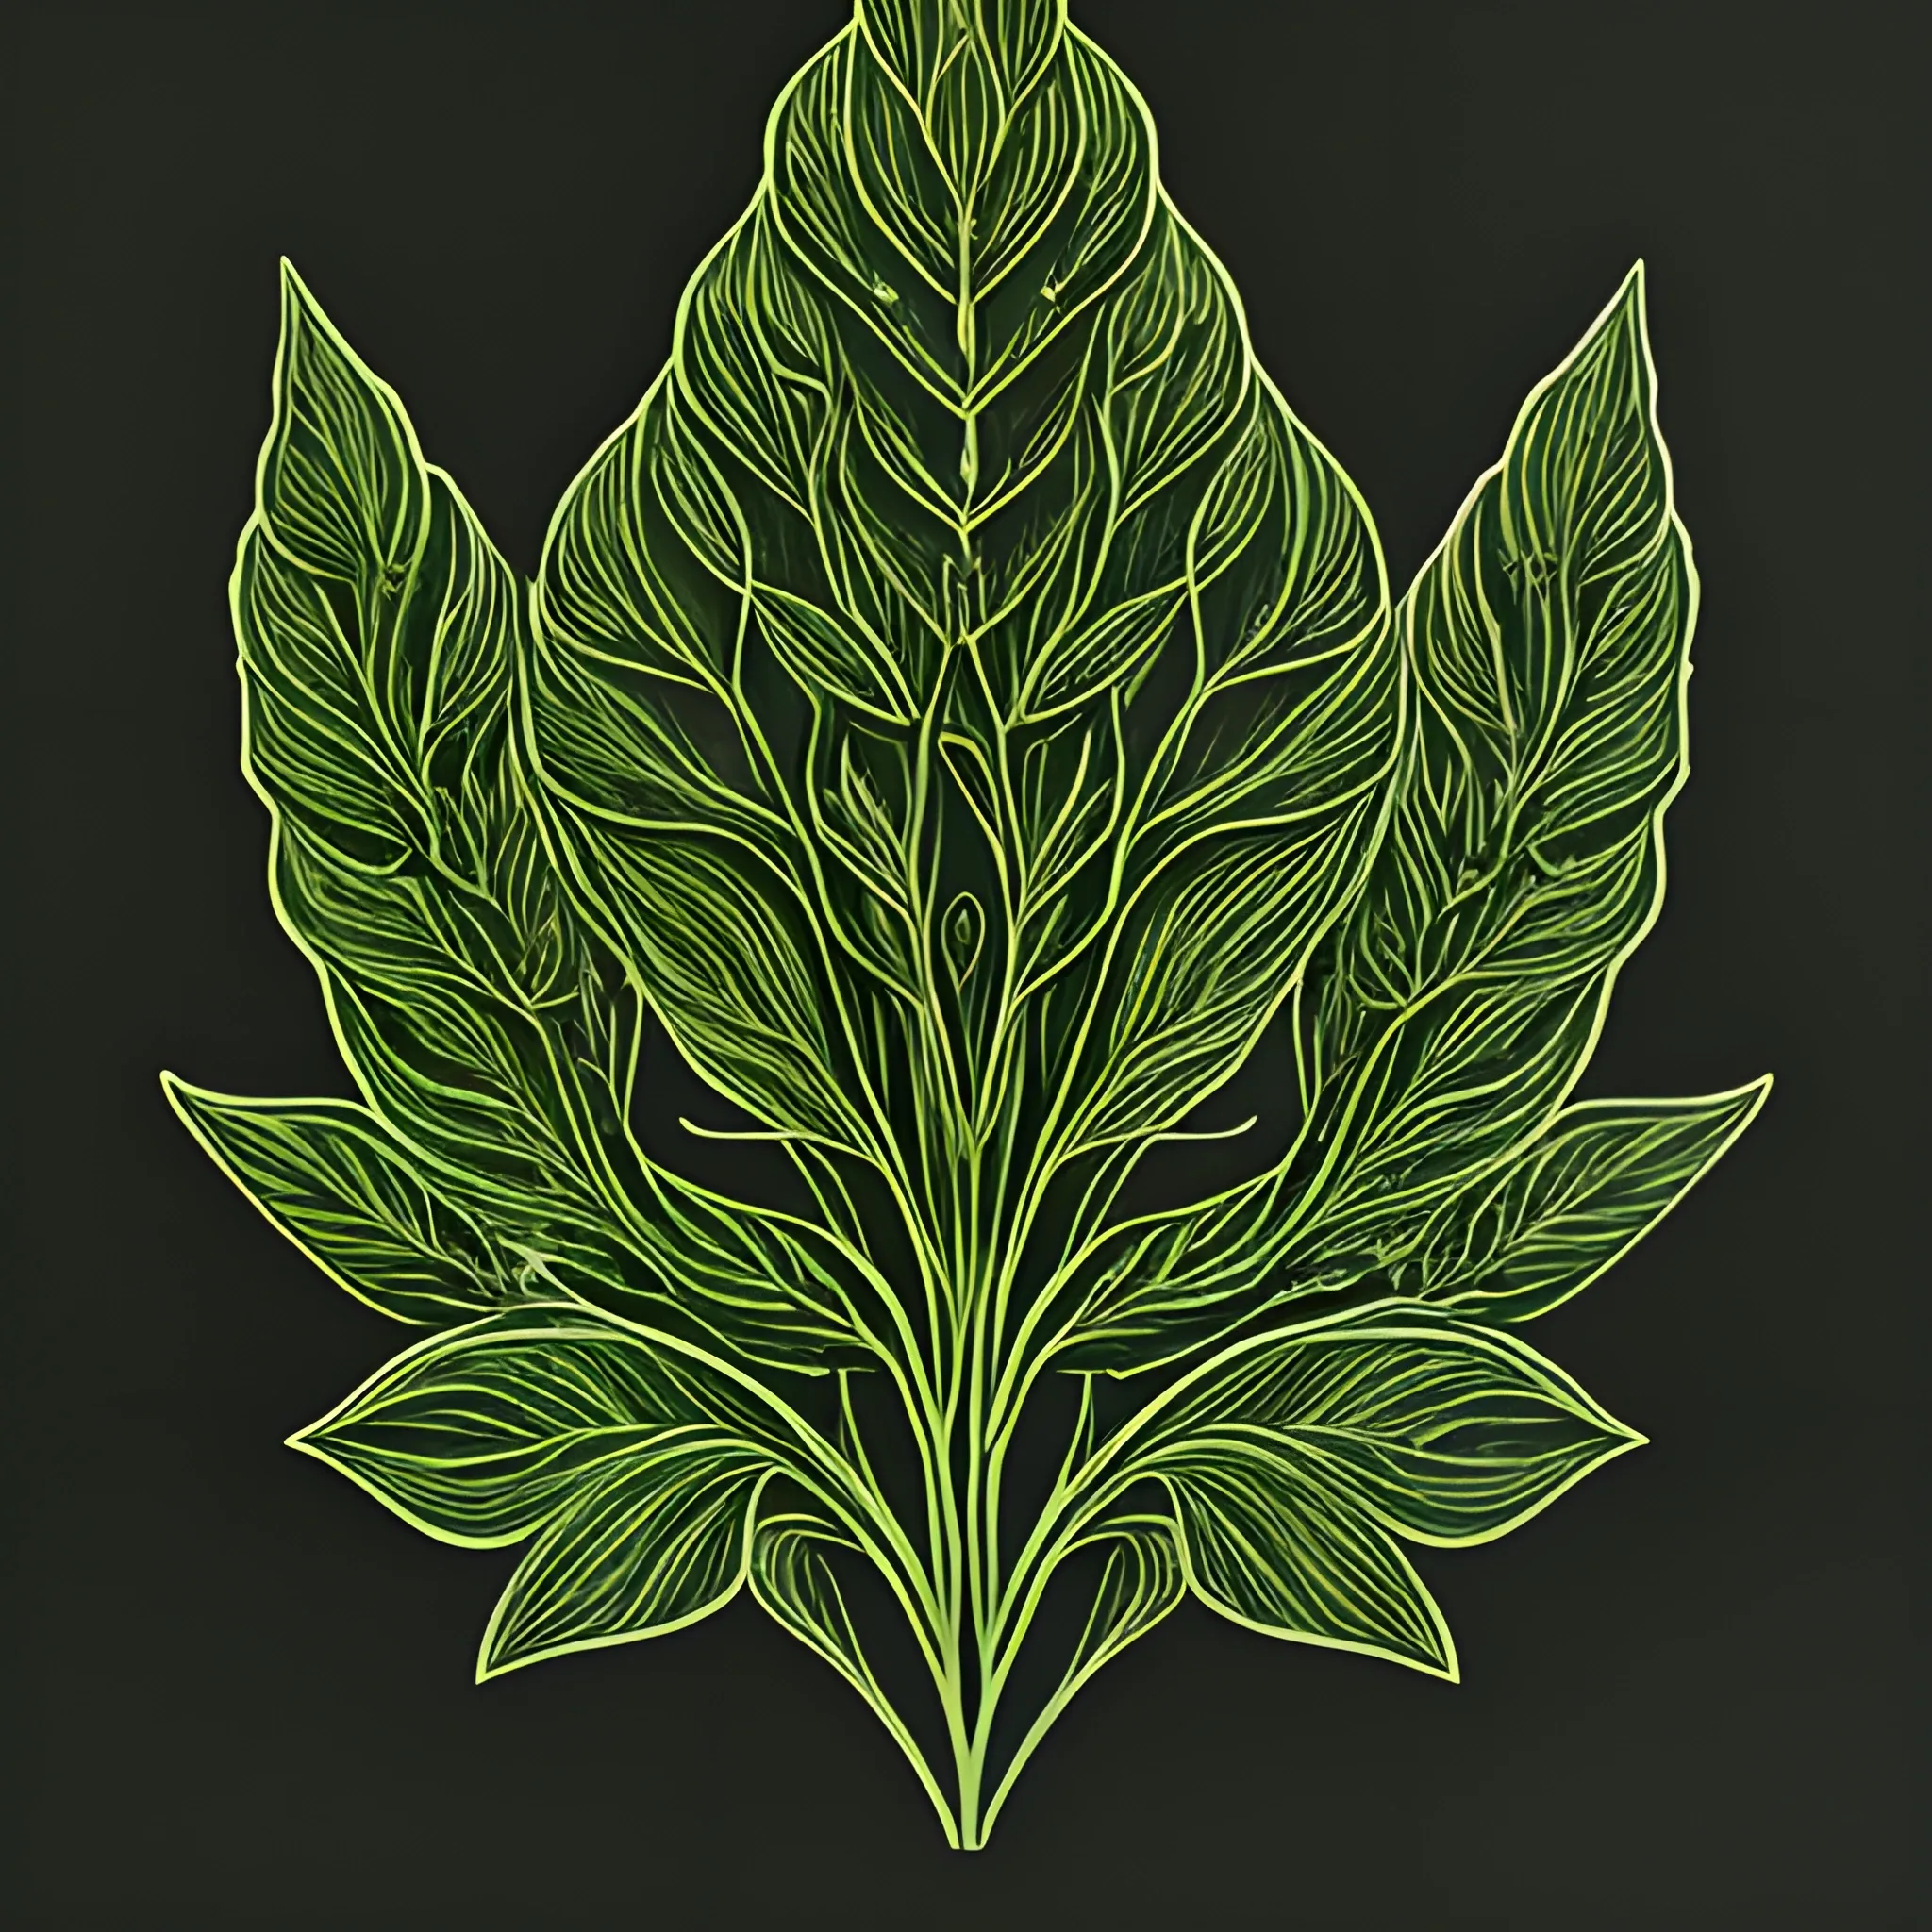 Botanic illustration of leaves :: Black paper with intricate and vibrant green line work :: Black and green gothic illustration